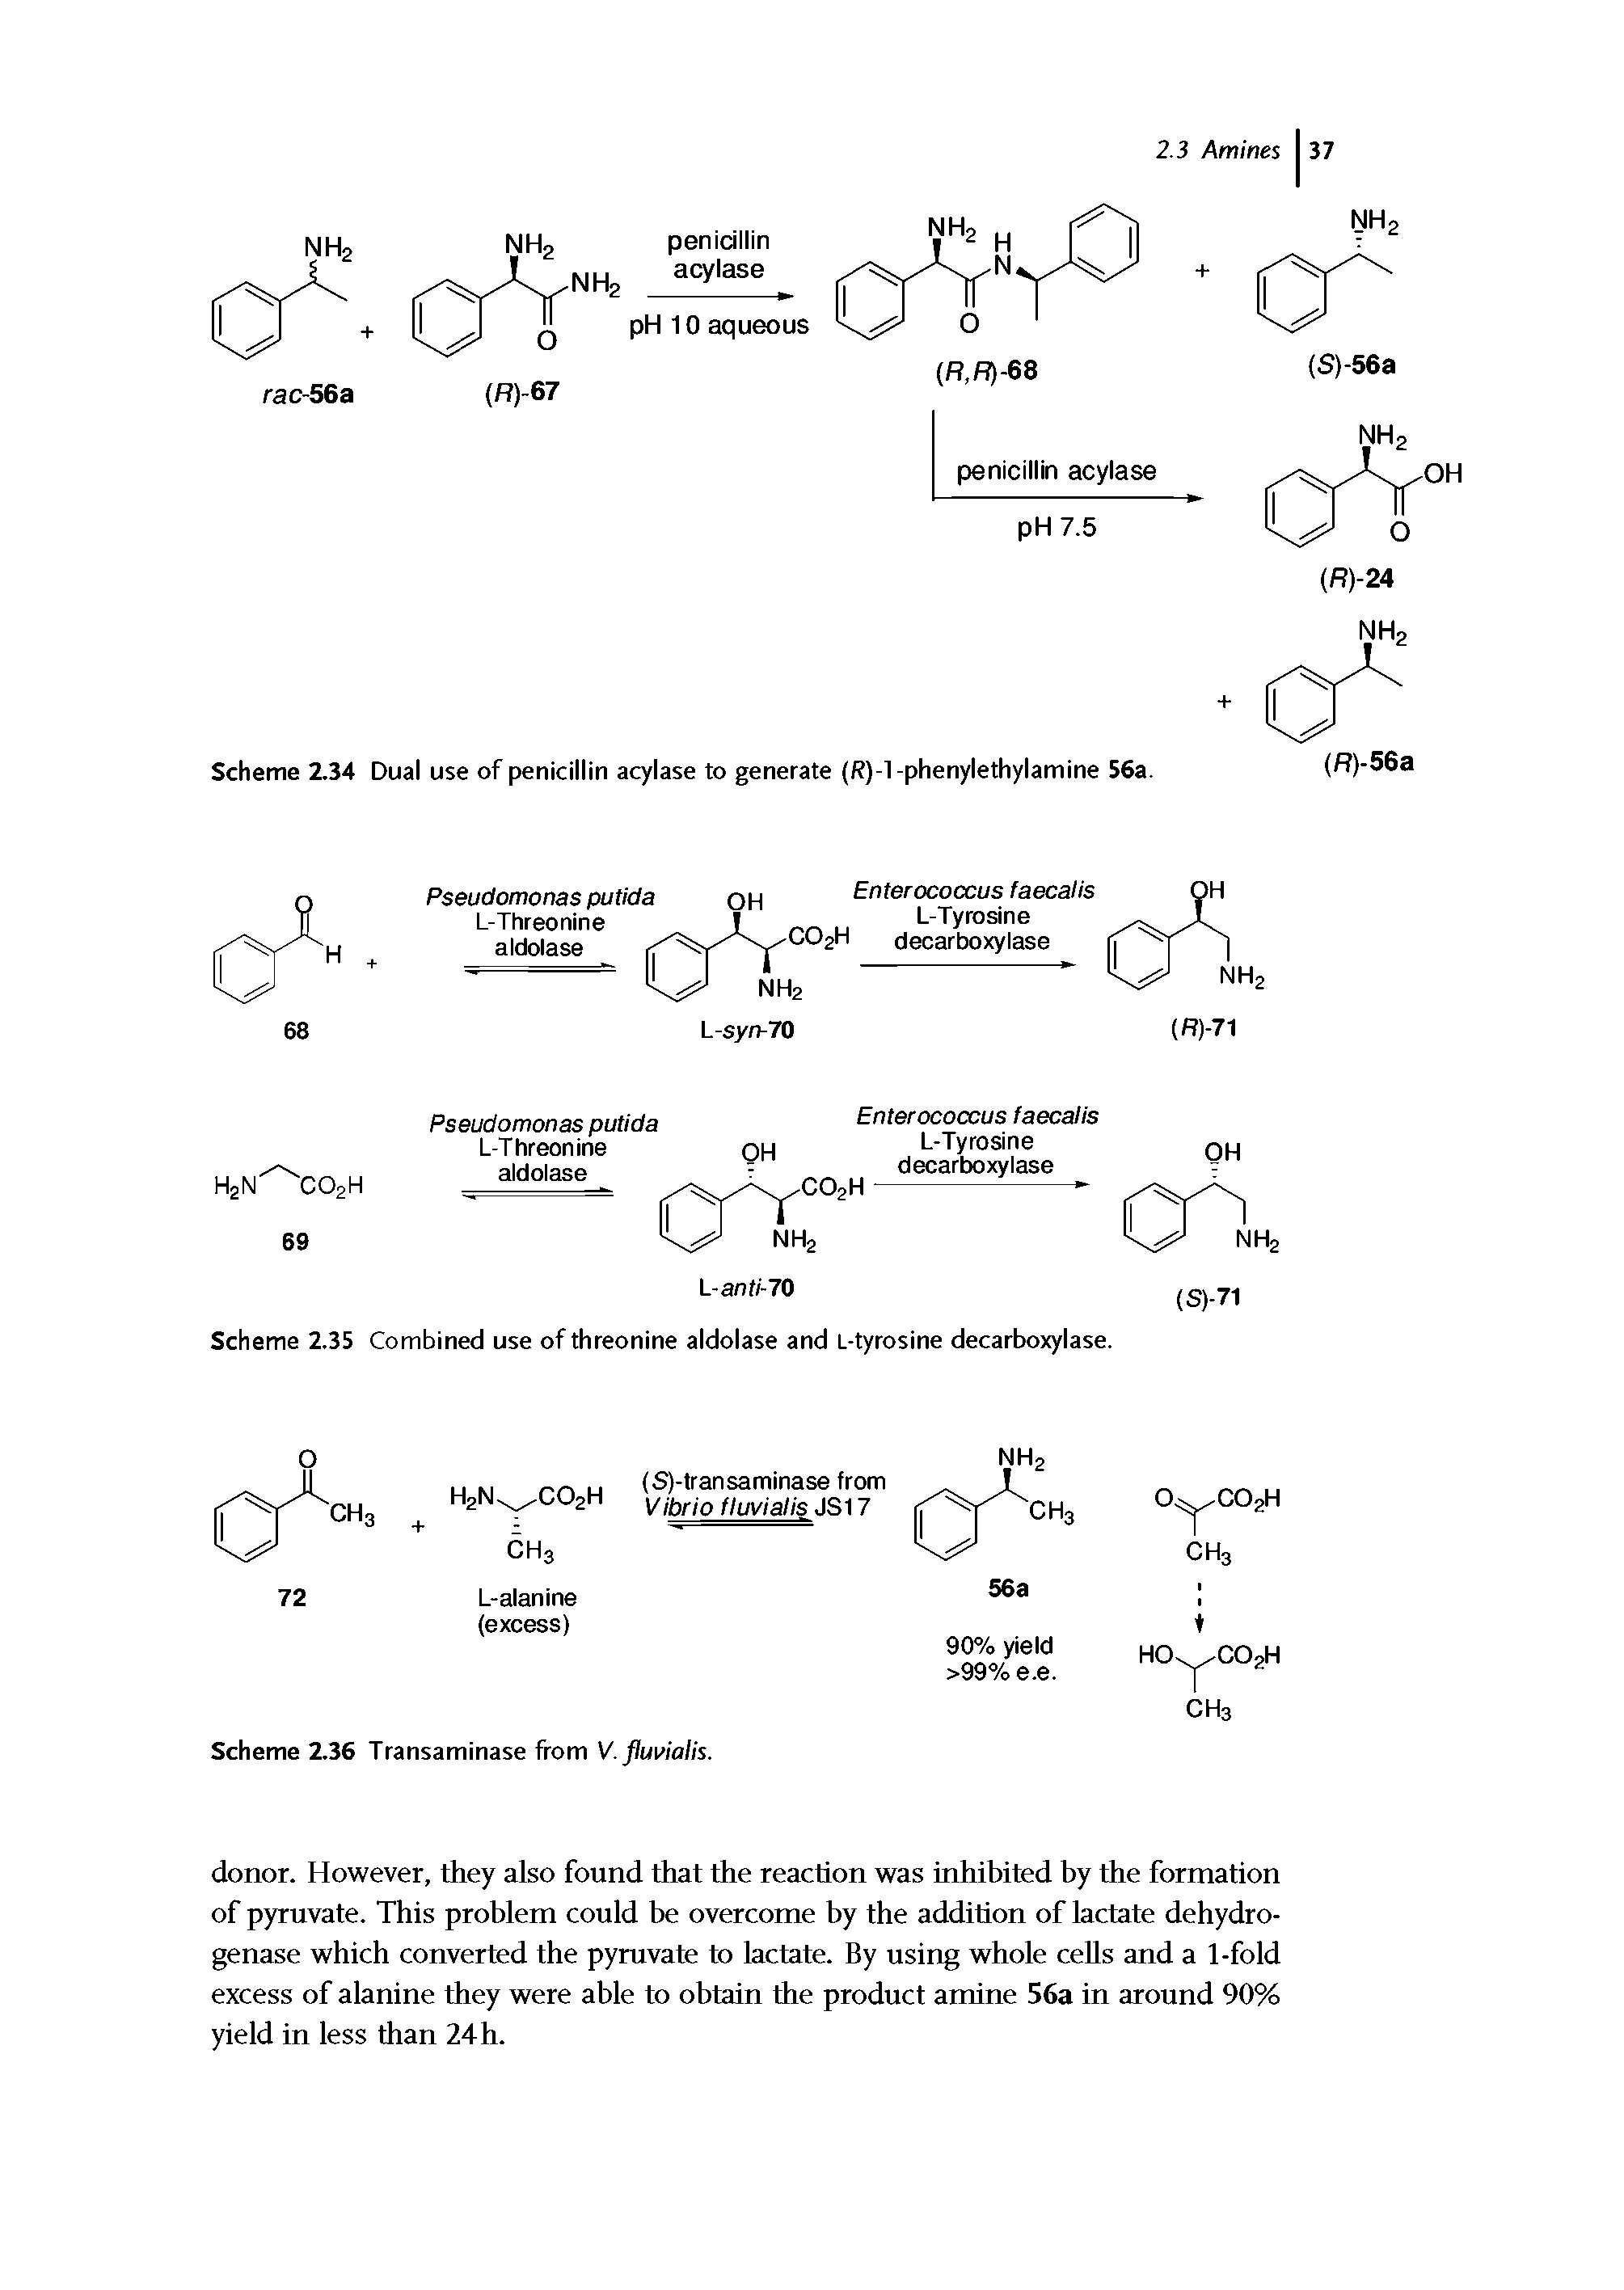 Scheme 2.34 Dual use of penicillin acylase to generate (R)-l -phenylethylamine 56a.